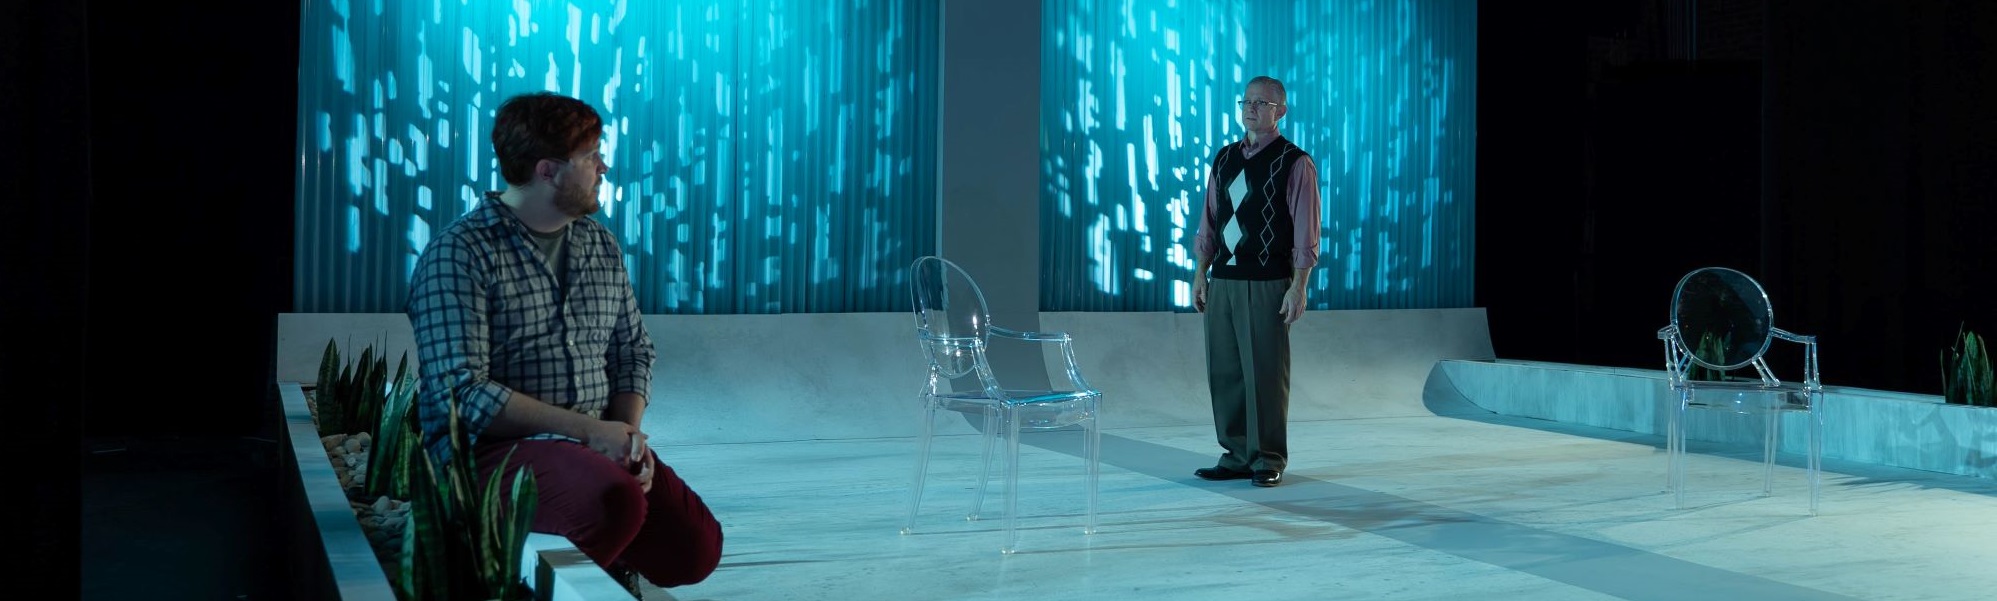 Two actors on a barren stage with blue lights in the background staring tensely at each other.